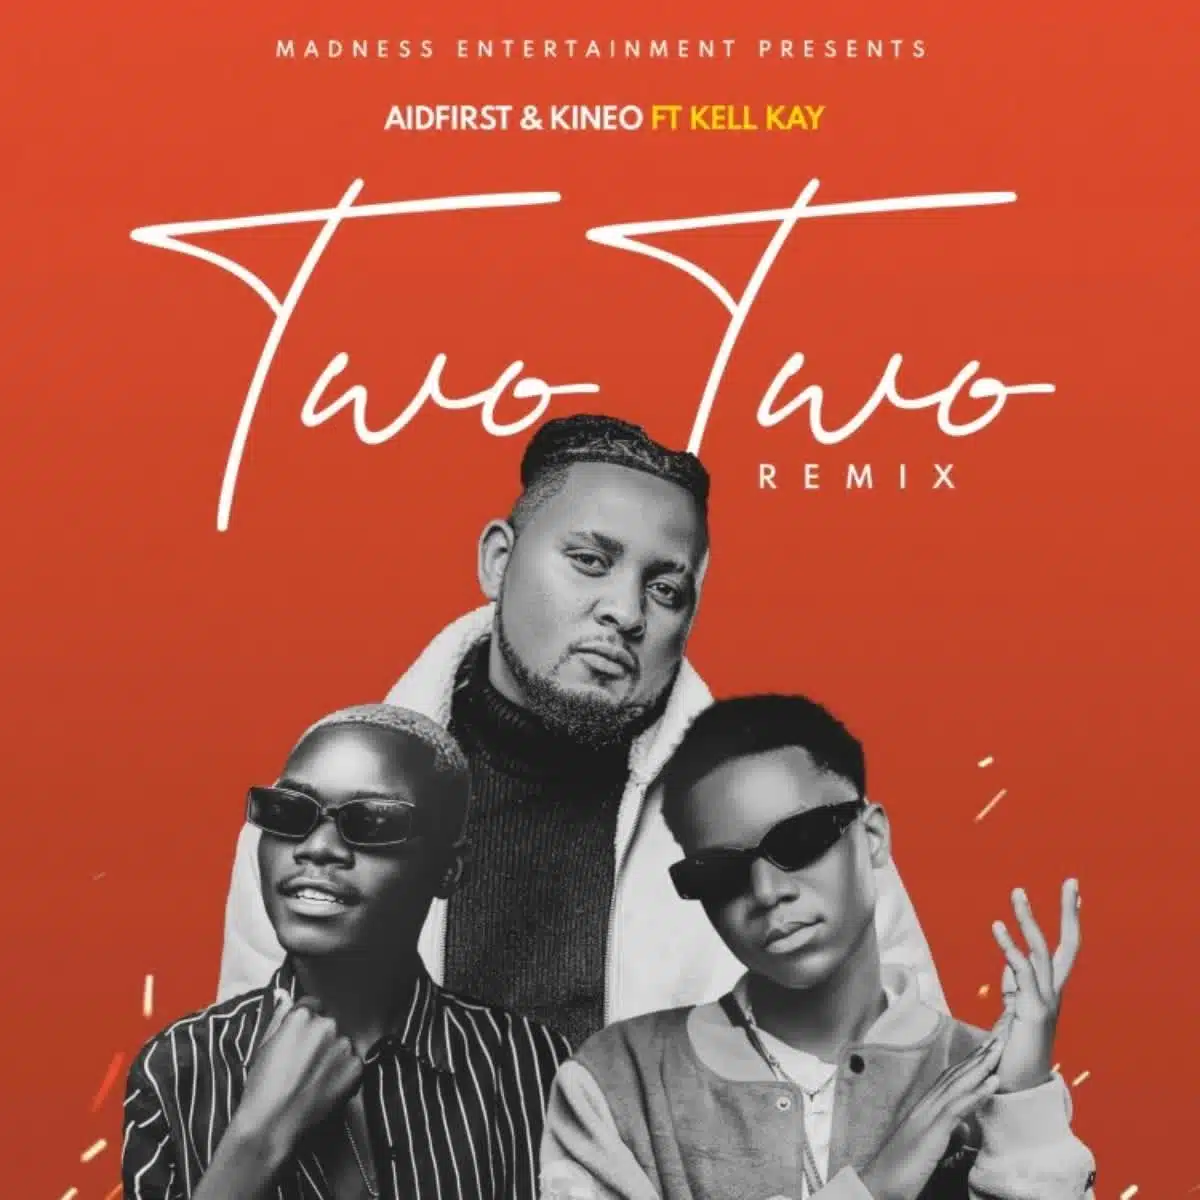 DOWNLOAD: Kineo & Aidfest Ft Kell Kay  – “Two Two Remix” Mp3